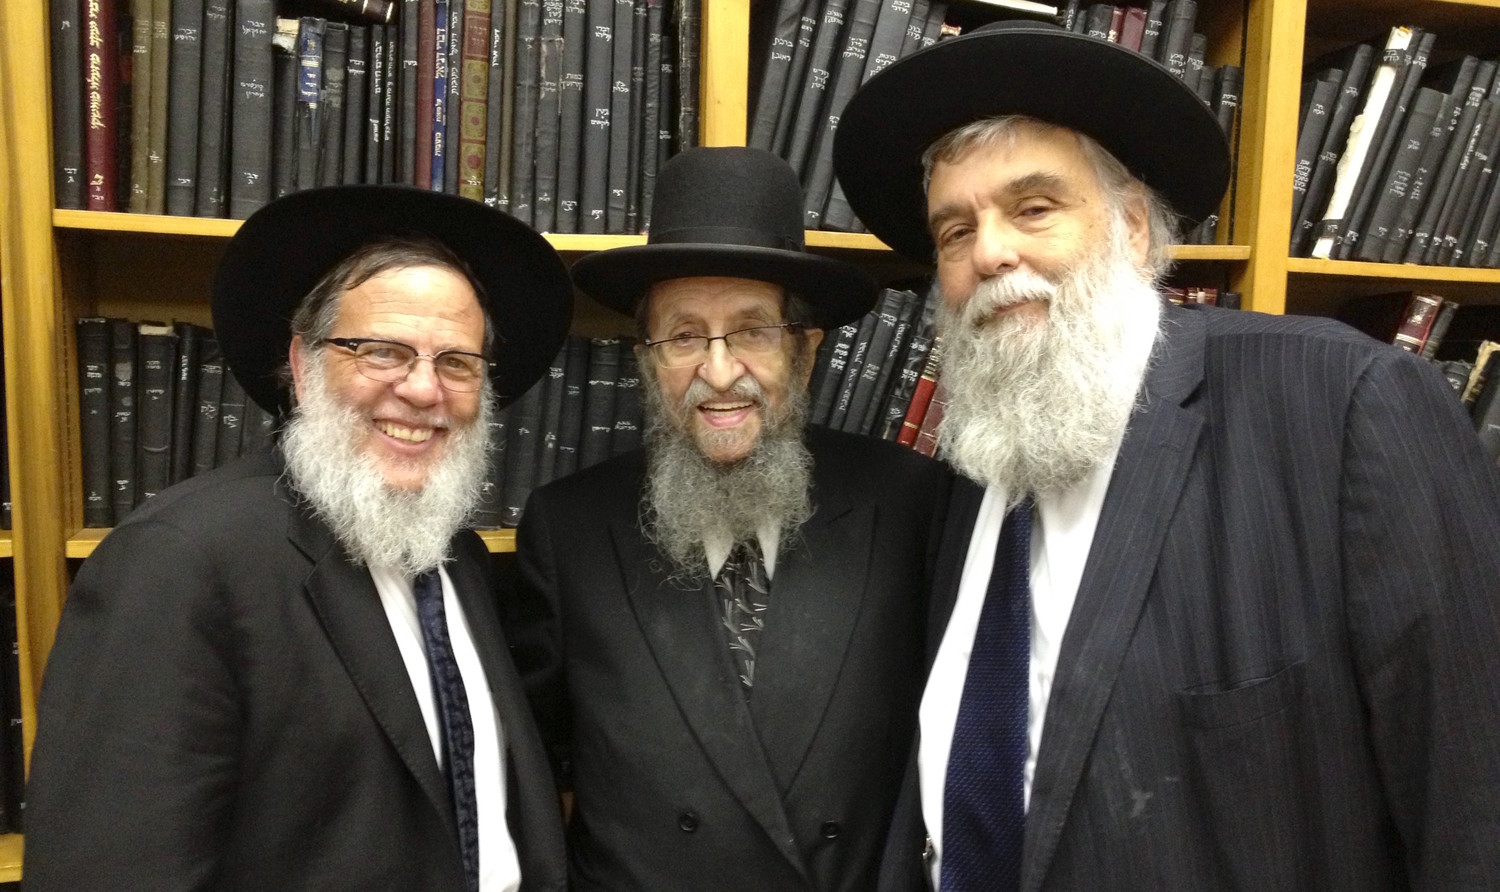 Rabbi Chanina Herzberg is pictured with, from left, Rabbis Mordechai and Shmuel Kamenetzky.